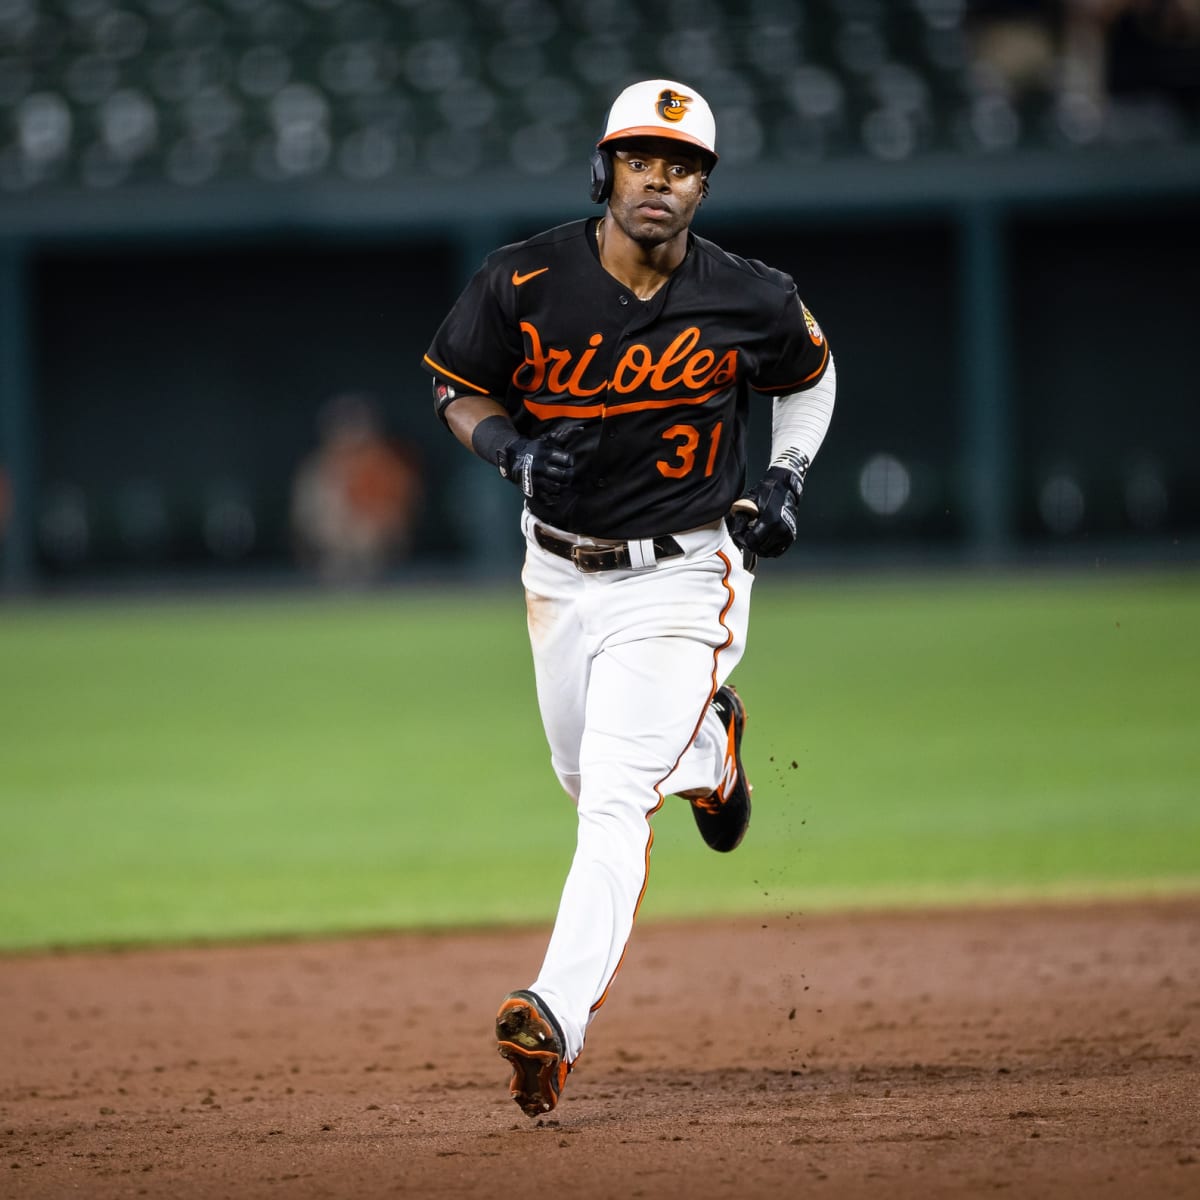 Orioles outfield prospect Cedric Mullins showing he has his legs back